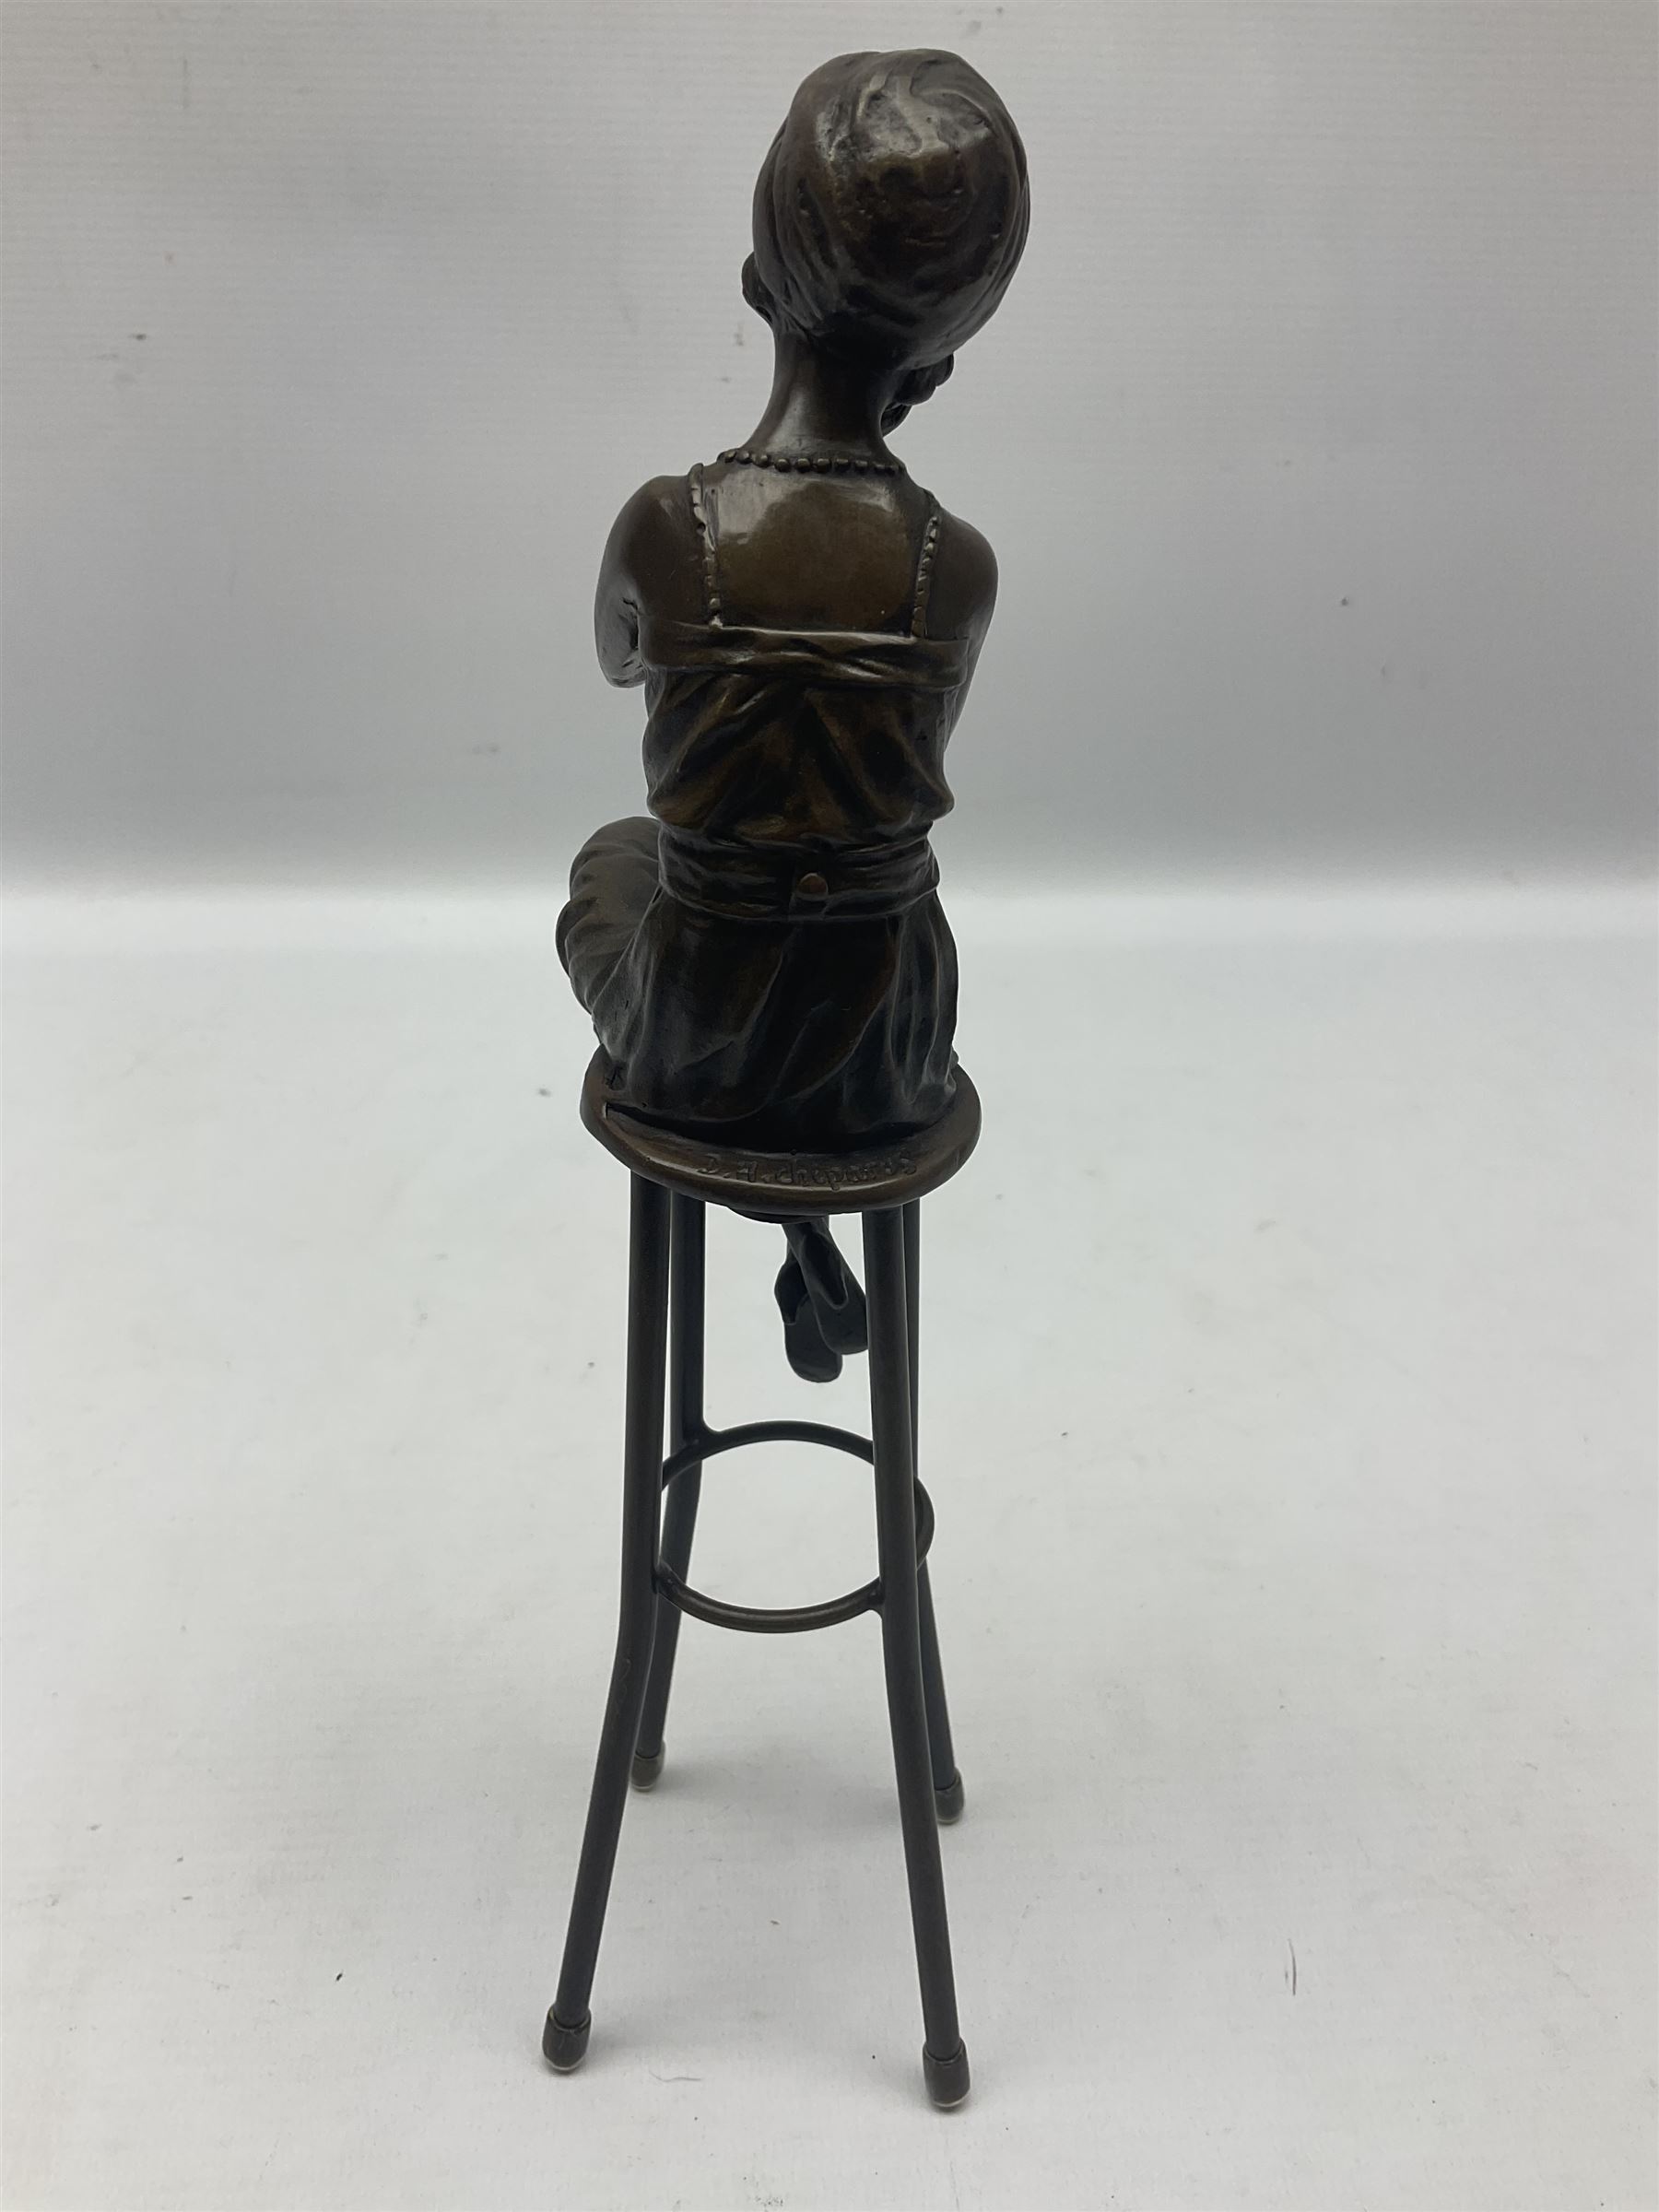 Art Deco style bronze figure of a lady seated on a stool applying lipstick - Image 2 of 7